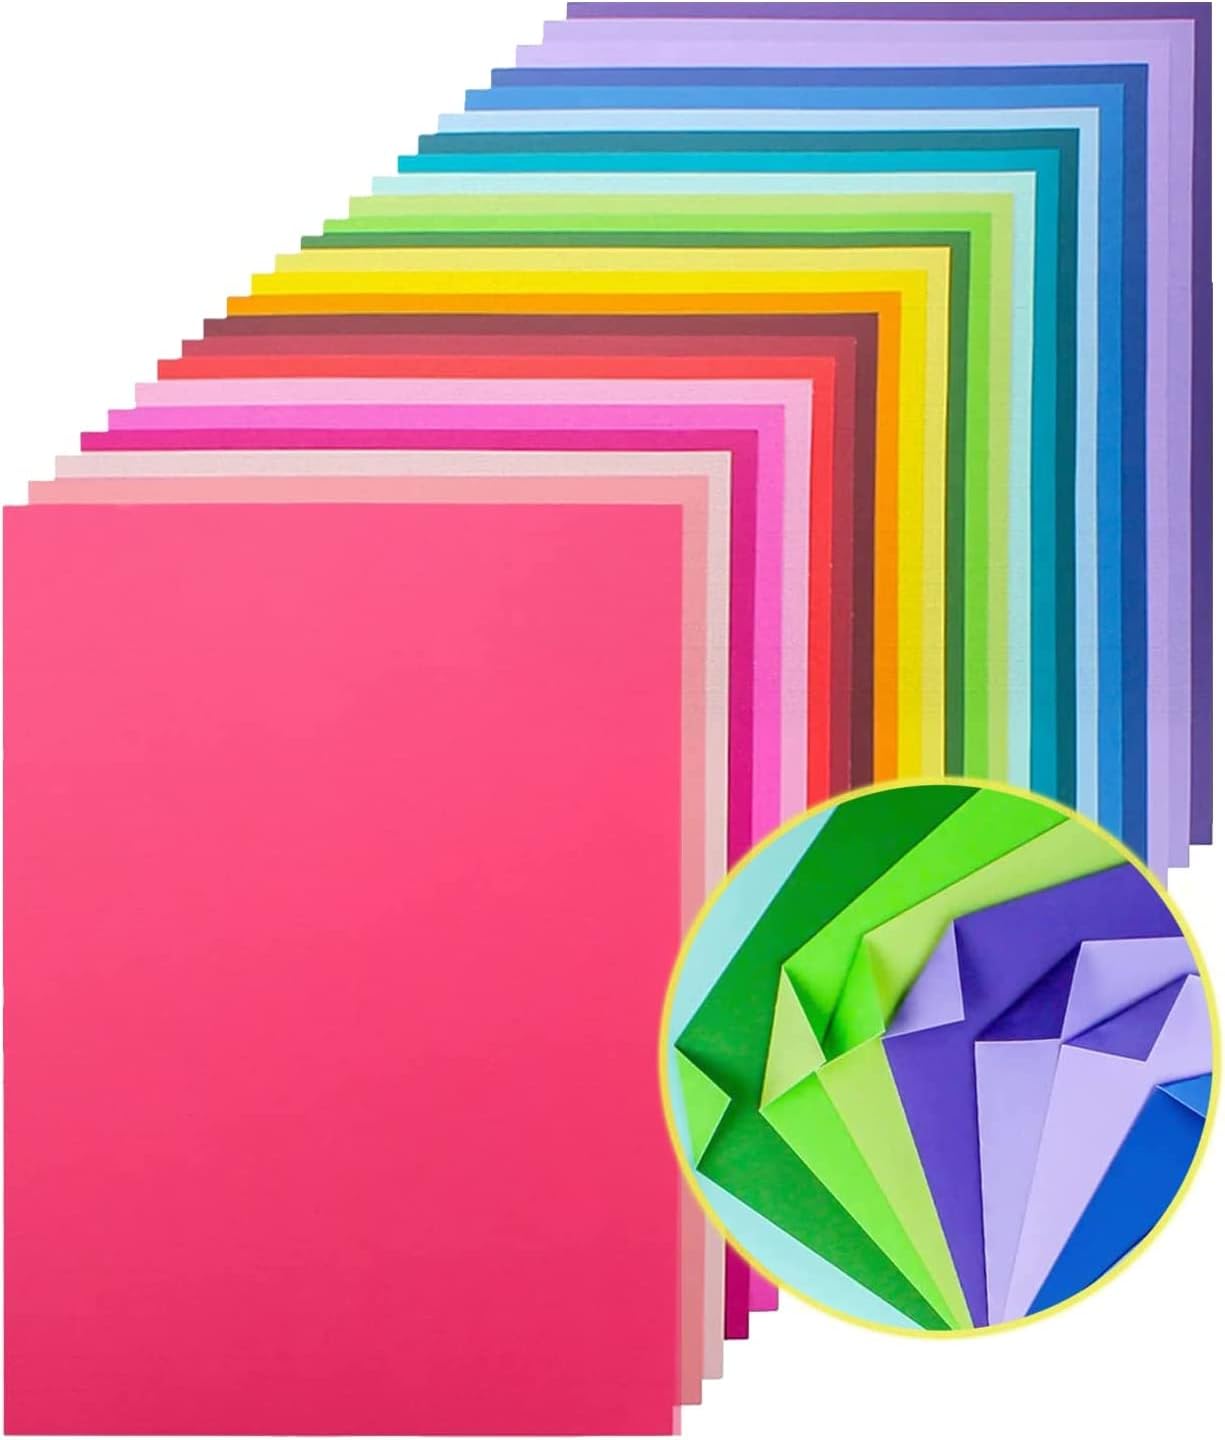 Recollections Cardstock Paper Essentials 20 Colors 200 Sheets WholeSale -  Price List, Bulk Buy at